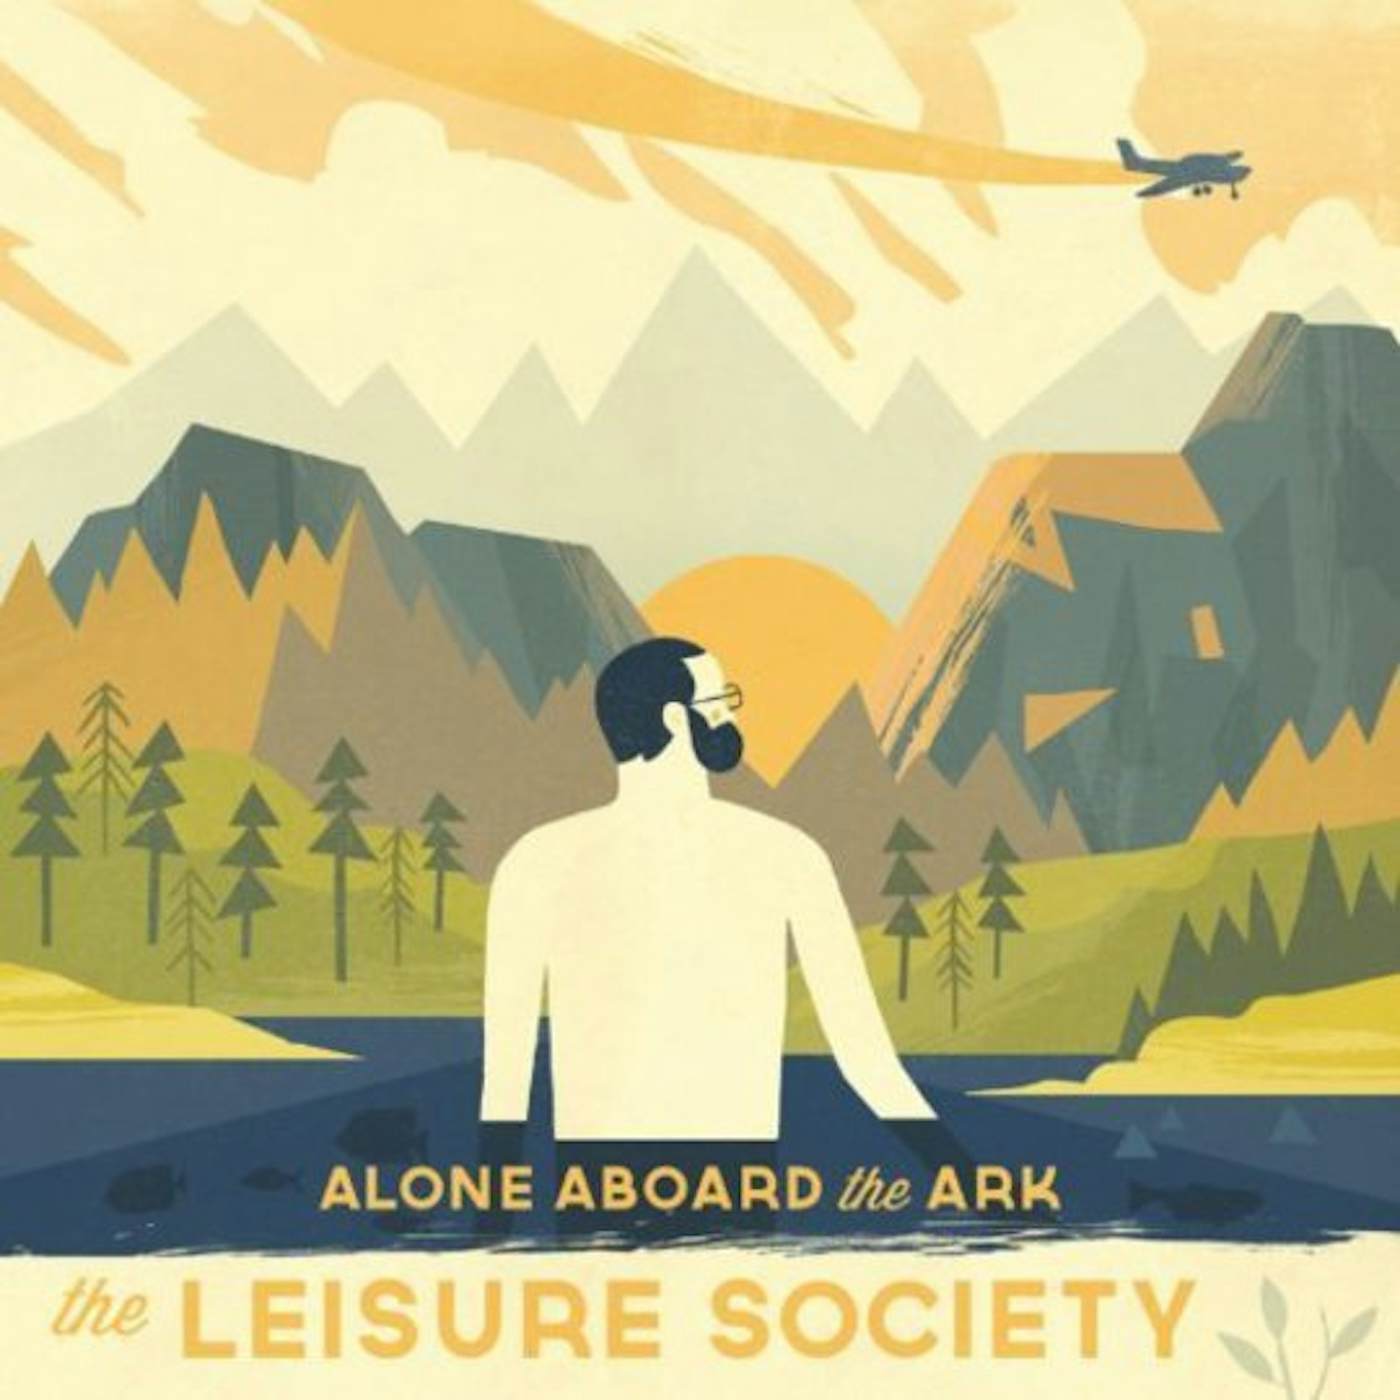 The Leisure Society Alone Aboard The(Lp) Vinyl Record